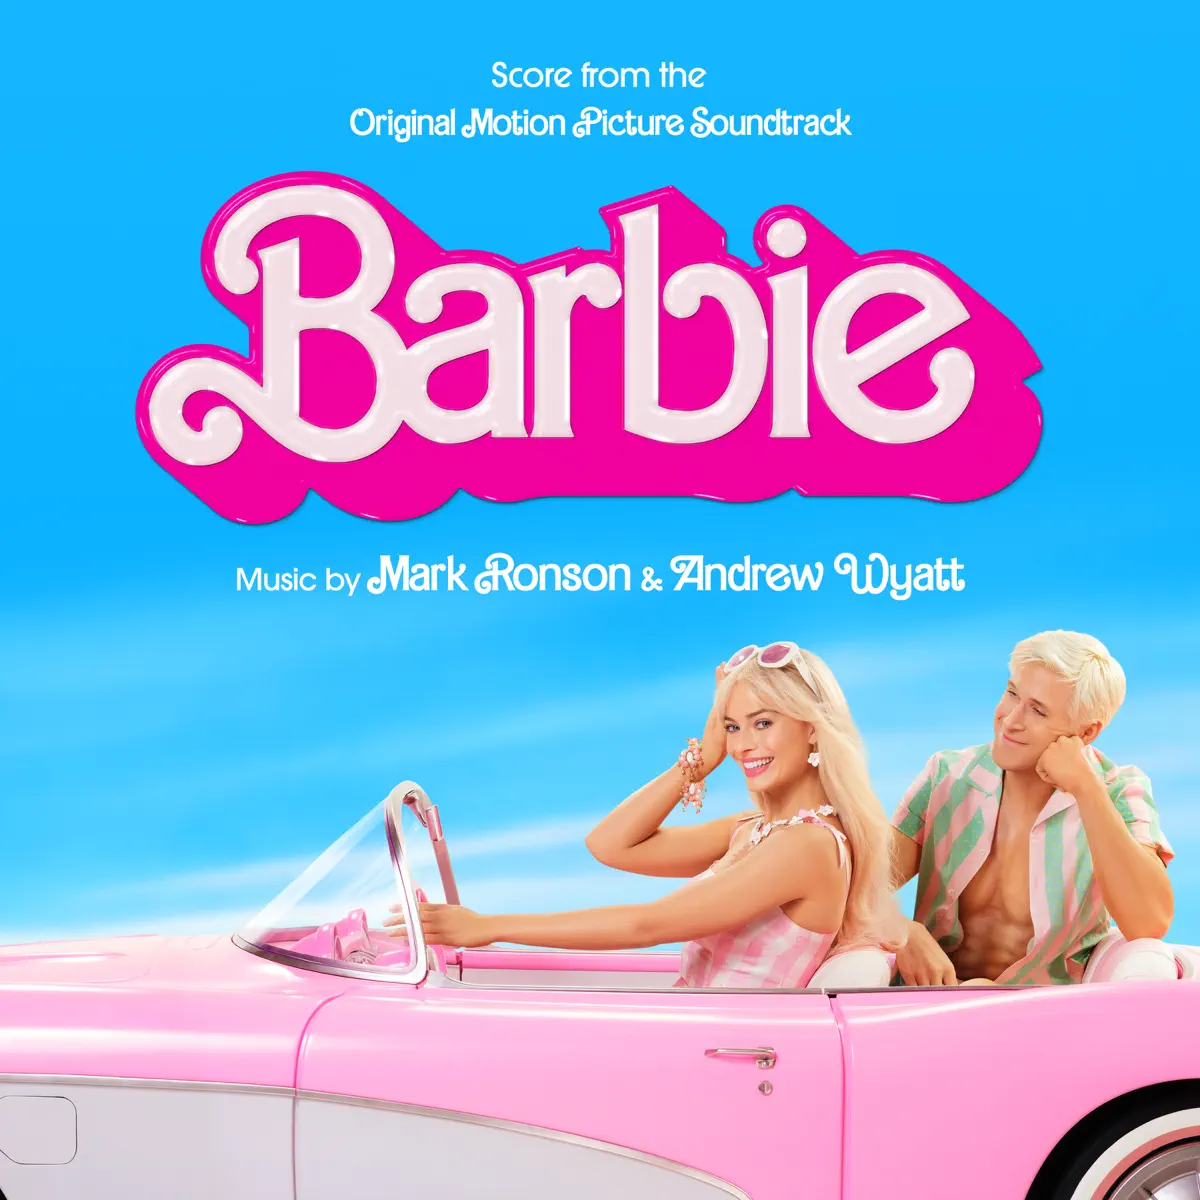 Andrew Wyatt & Mark Ronson - Barbie (Score from the Original Motion Picture Soundtrack) (2023) [iTunes Plus AAC M4A]-新房子